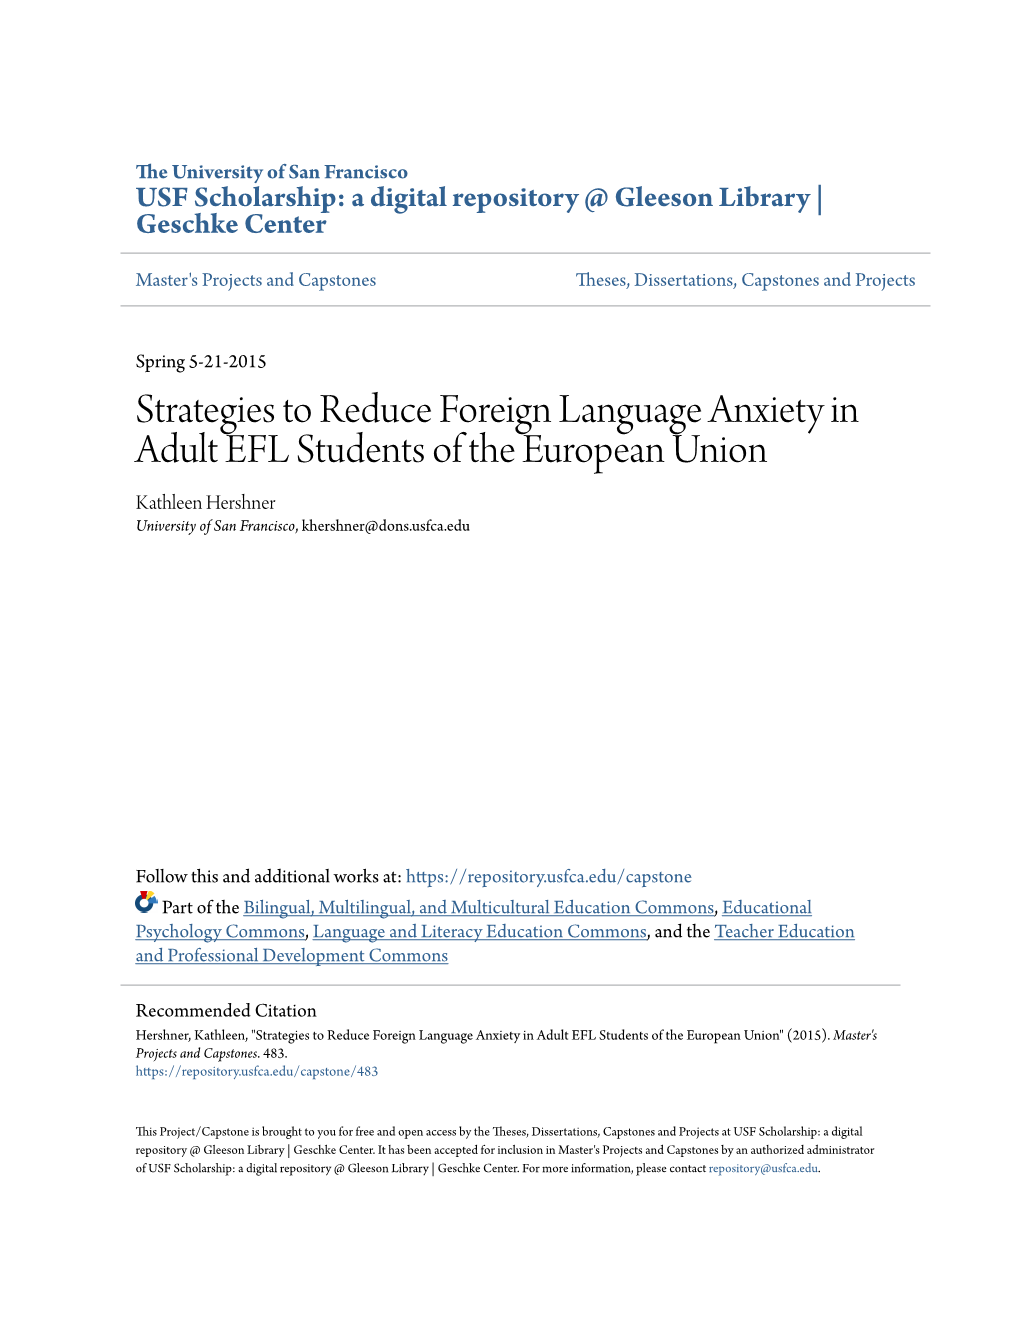 Strategies to Reduce Foreign Language Anxiety in Adult EFL Students of the European Union Kathleen Hershner University of San Francisco, Khershner@Dons.Usfca.Edu